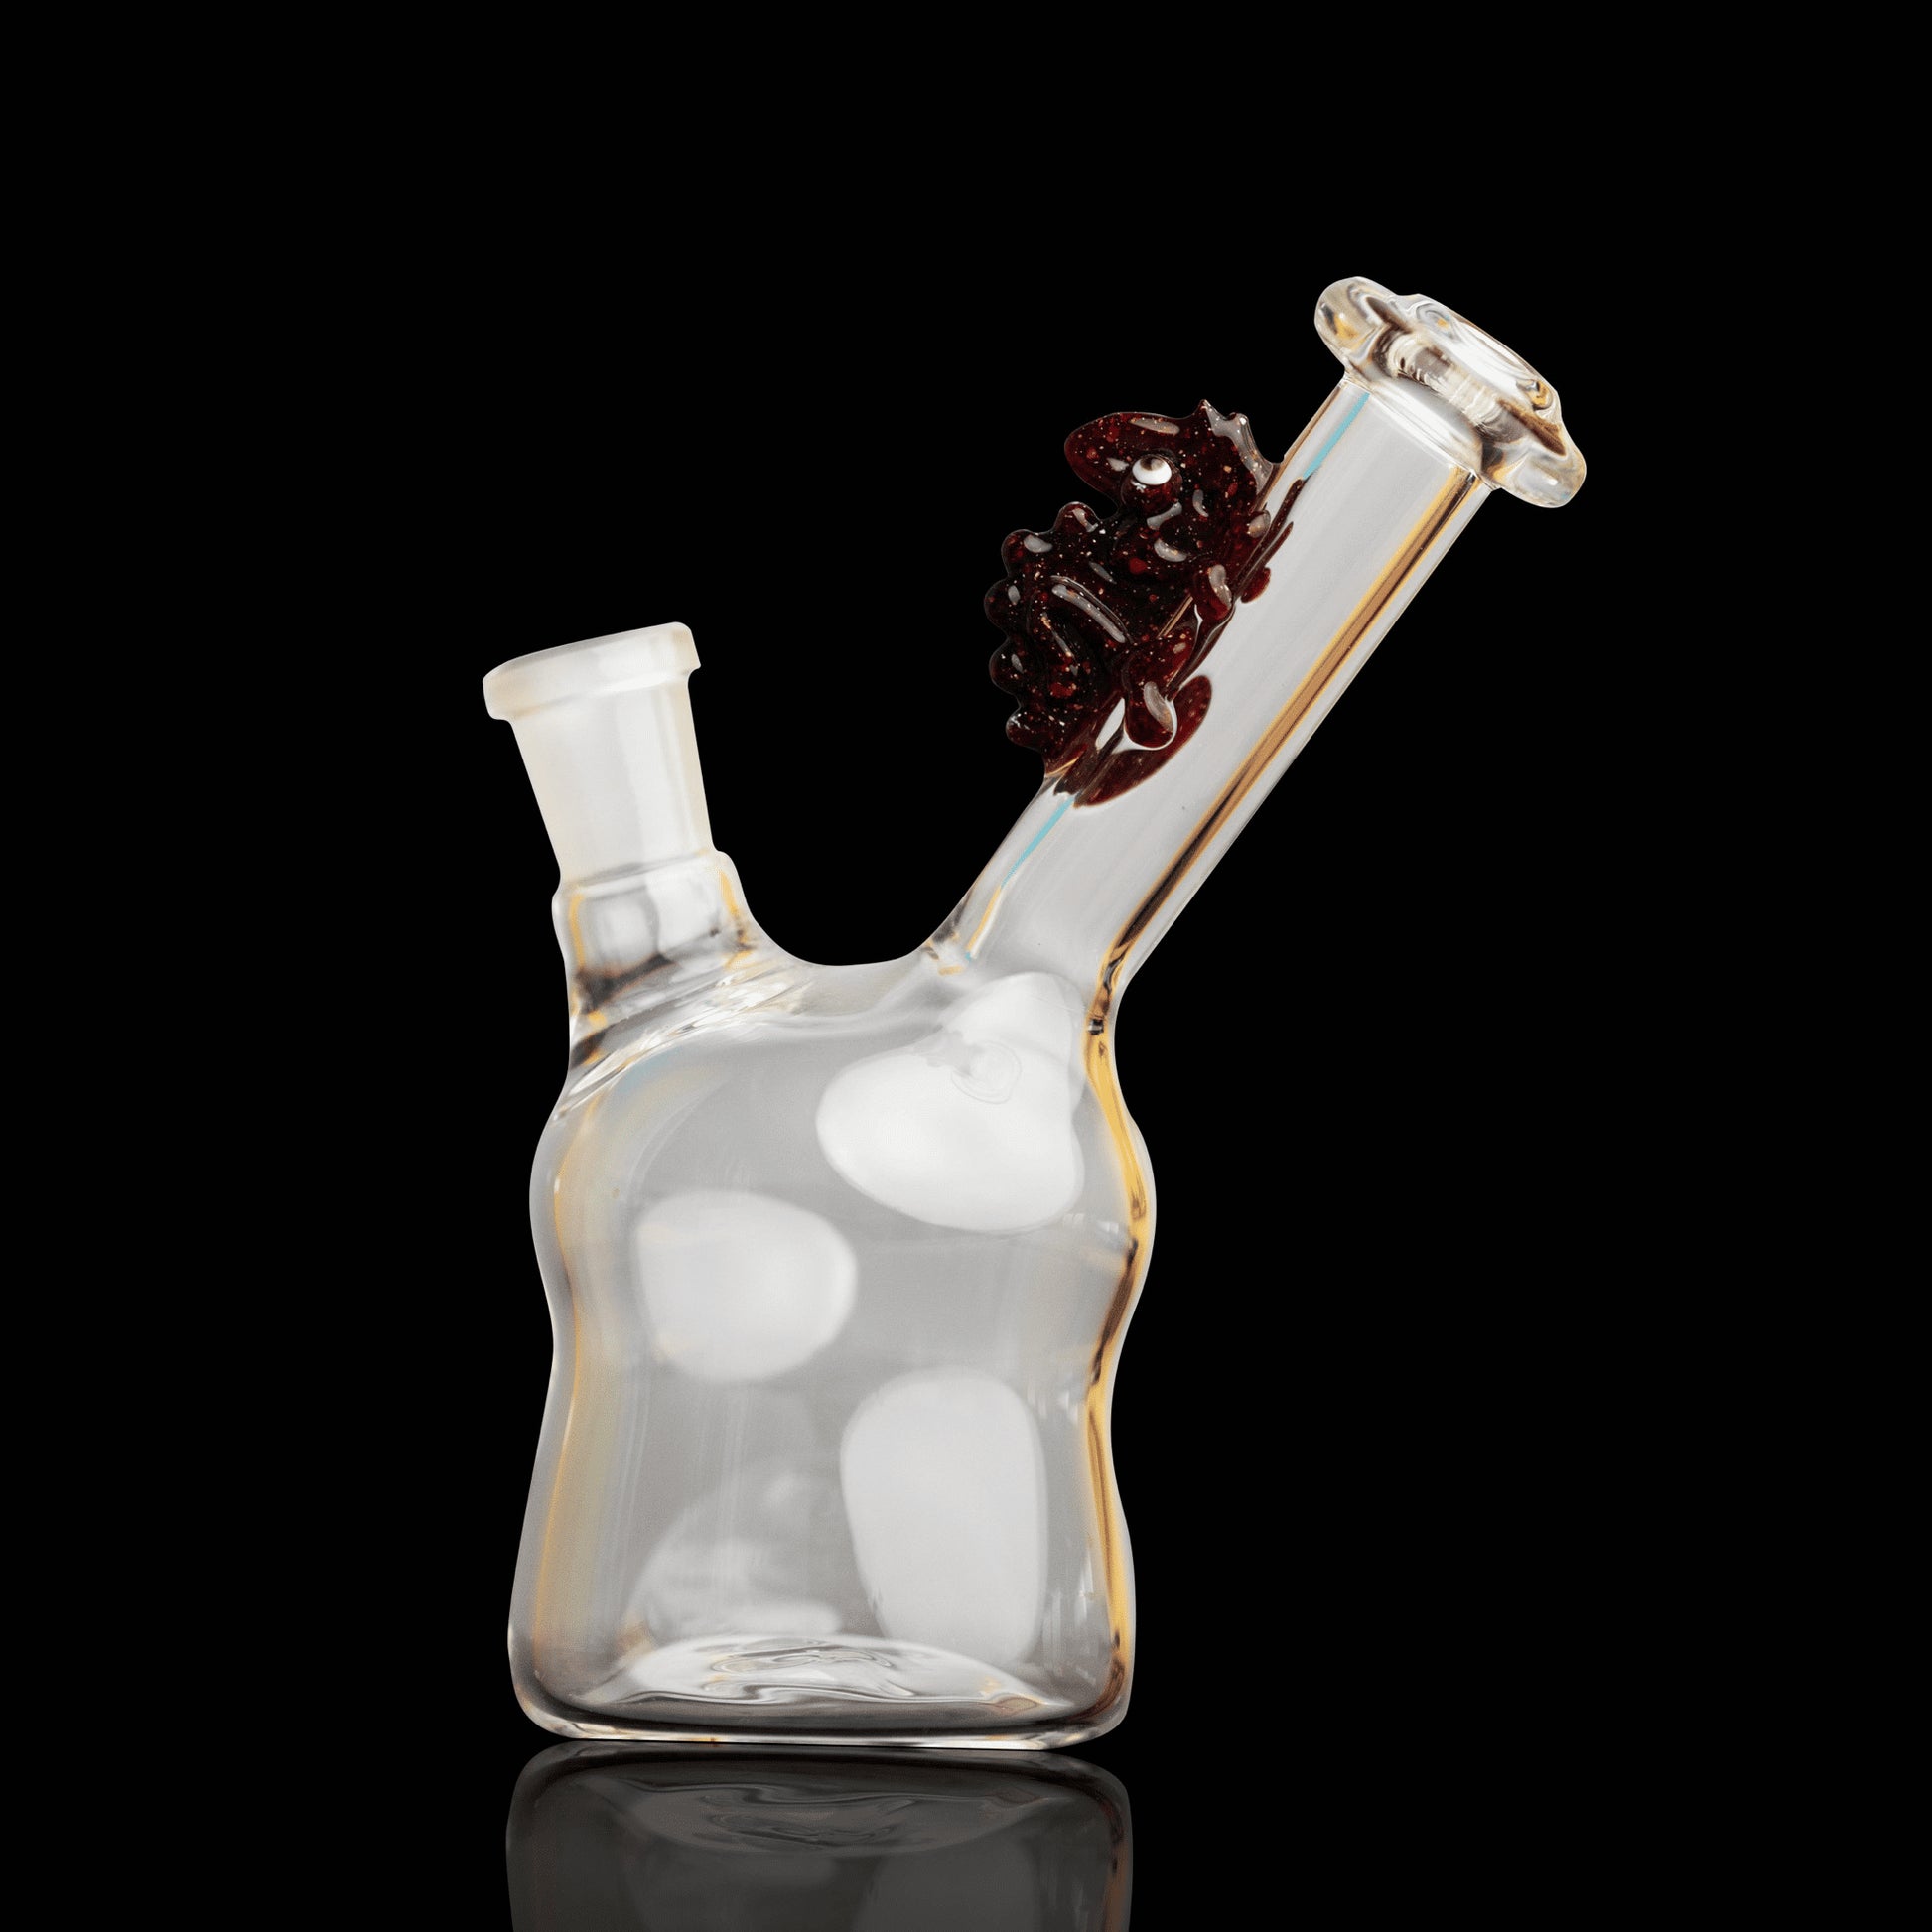 luxurious design of the Clear Rig w/ Red Chameleon (I) by Willy That Glass Guy